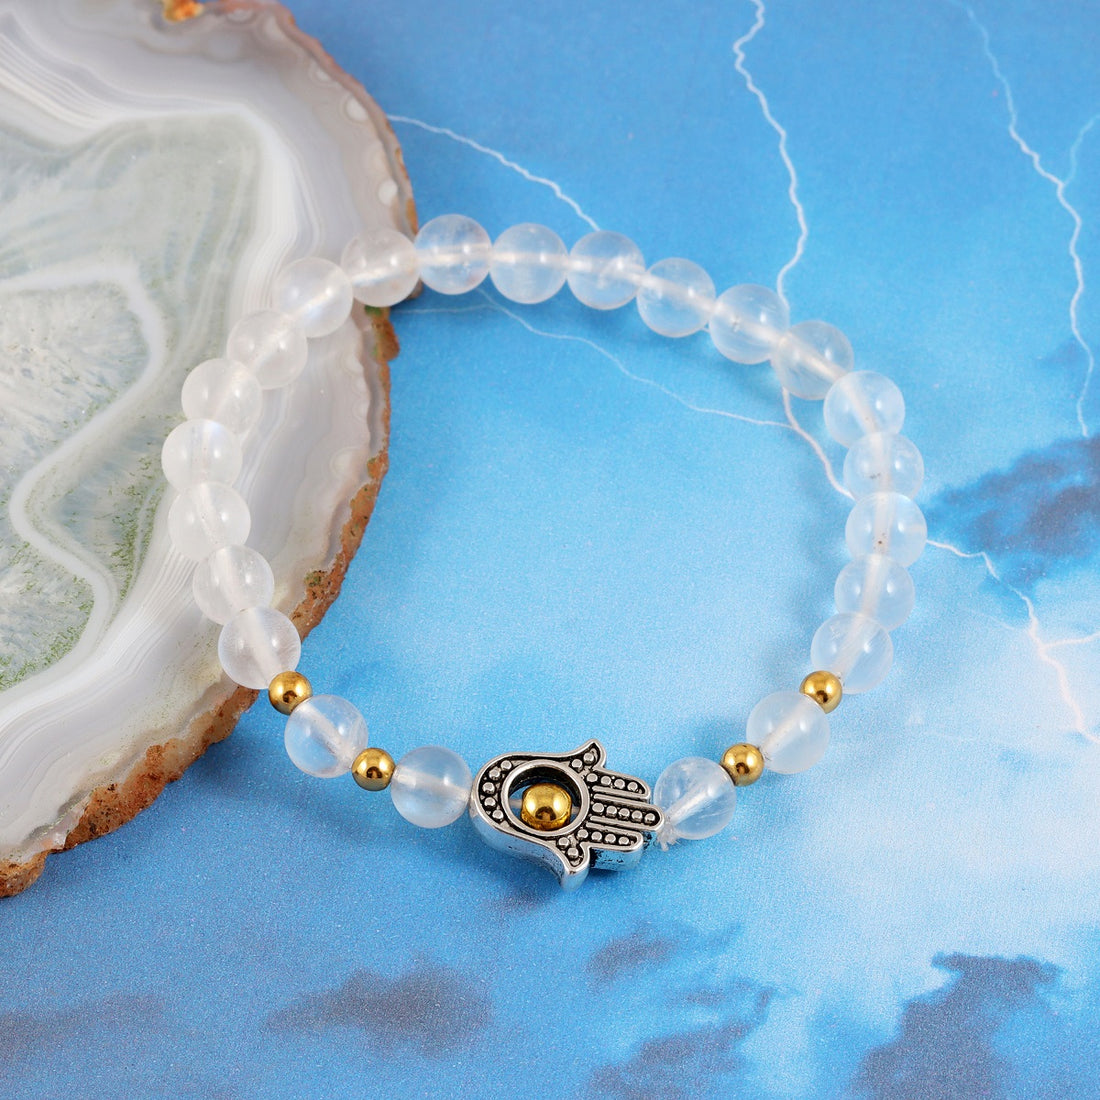 A bracelet adorned with smooth round Rainbow Moonstone beads, reflecting iridescent shades of white and promoting intuition and emotional balance.